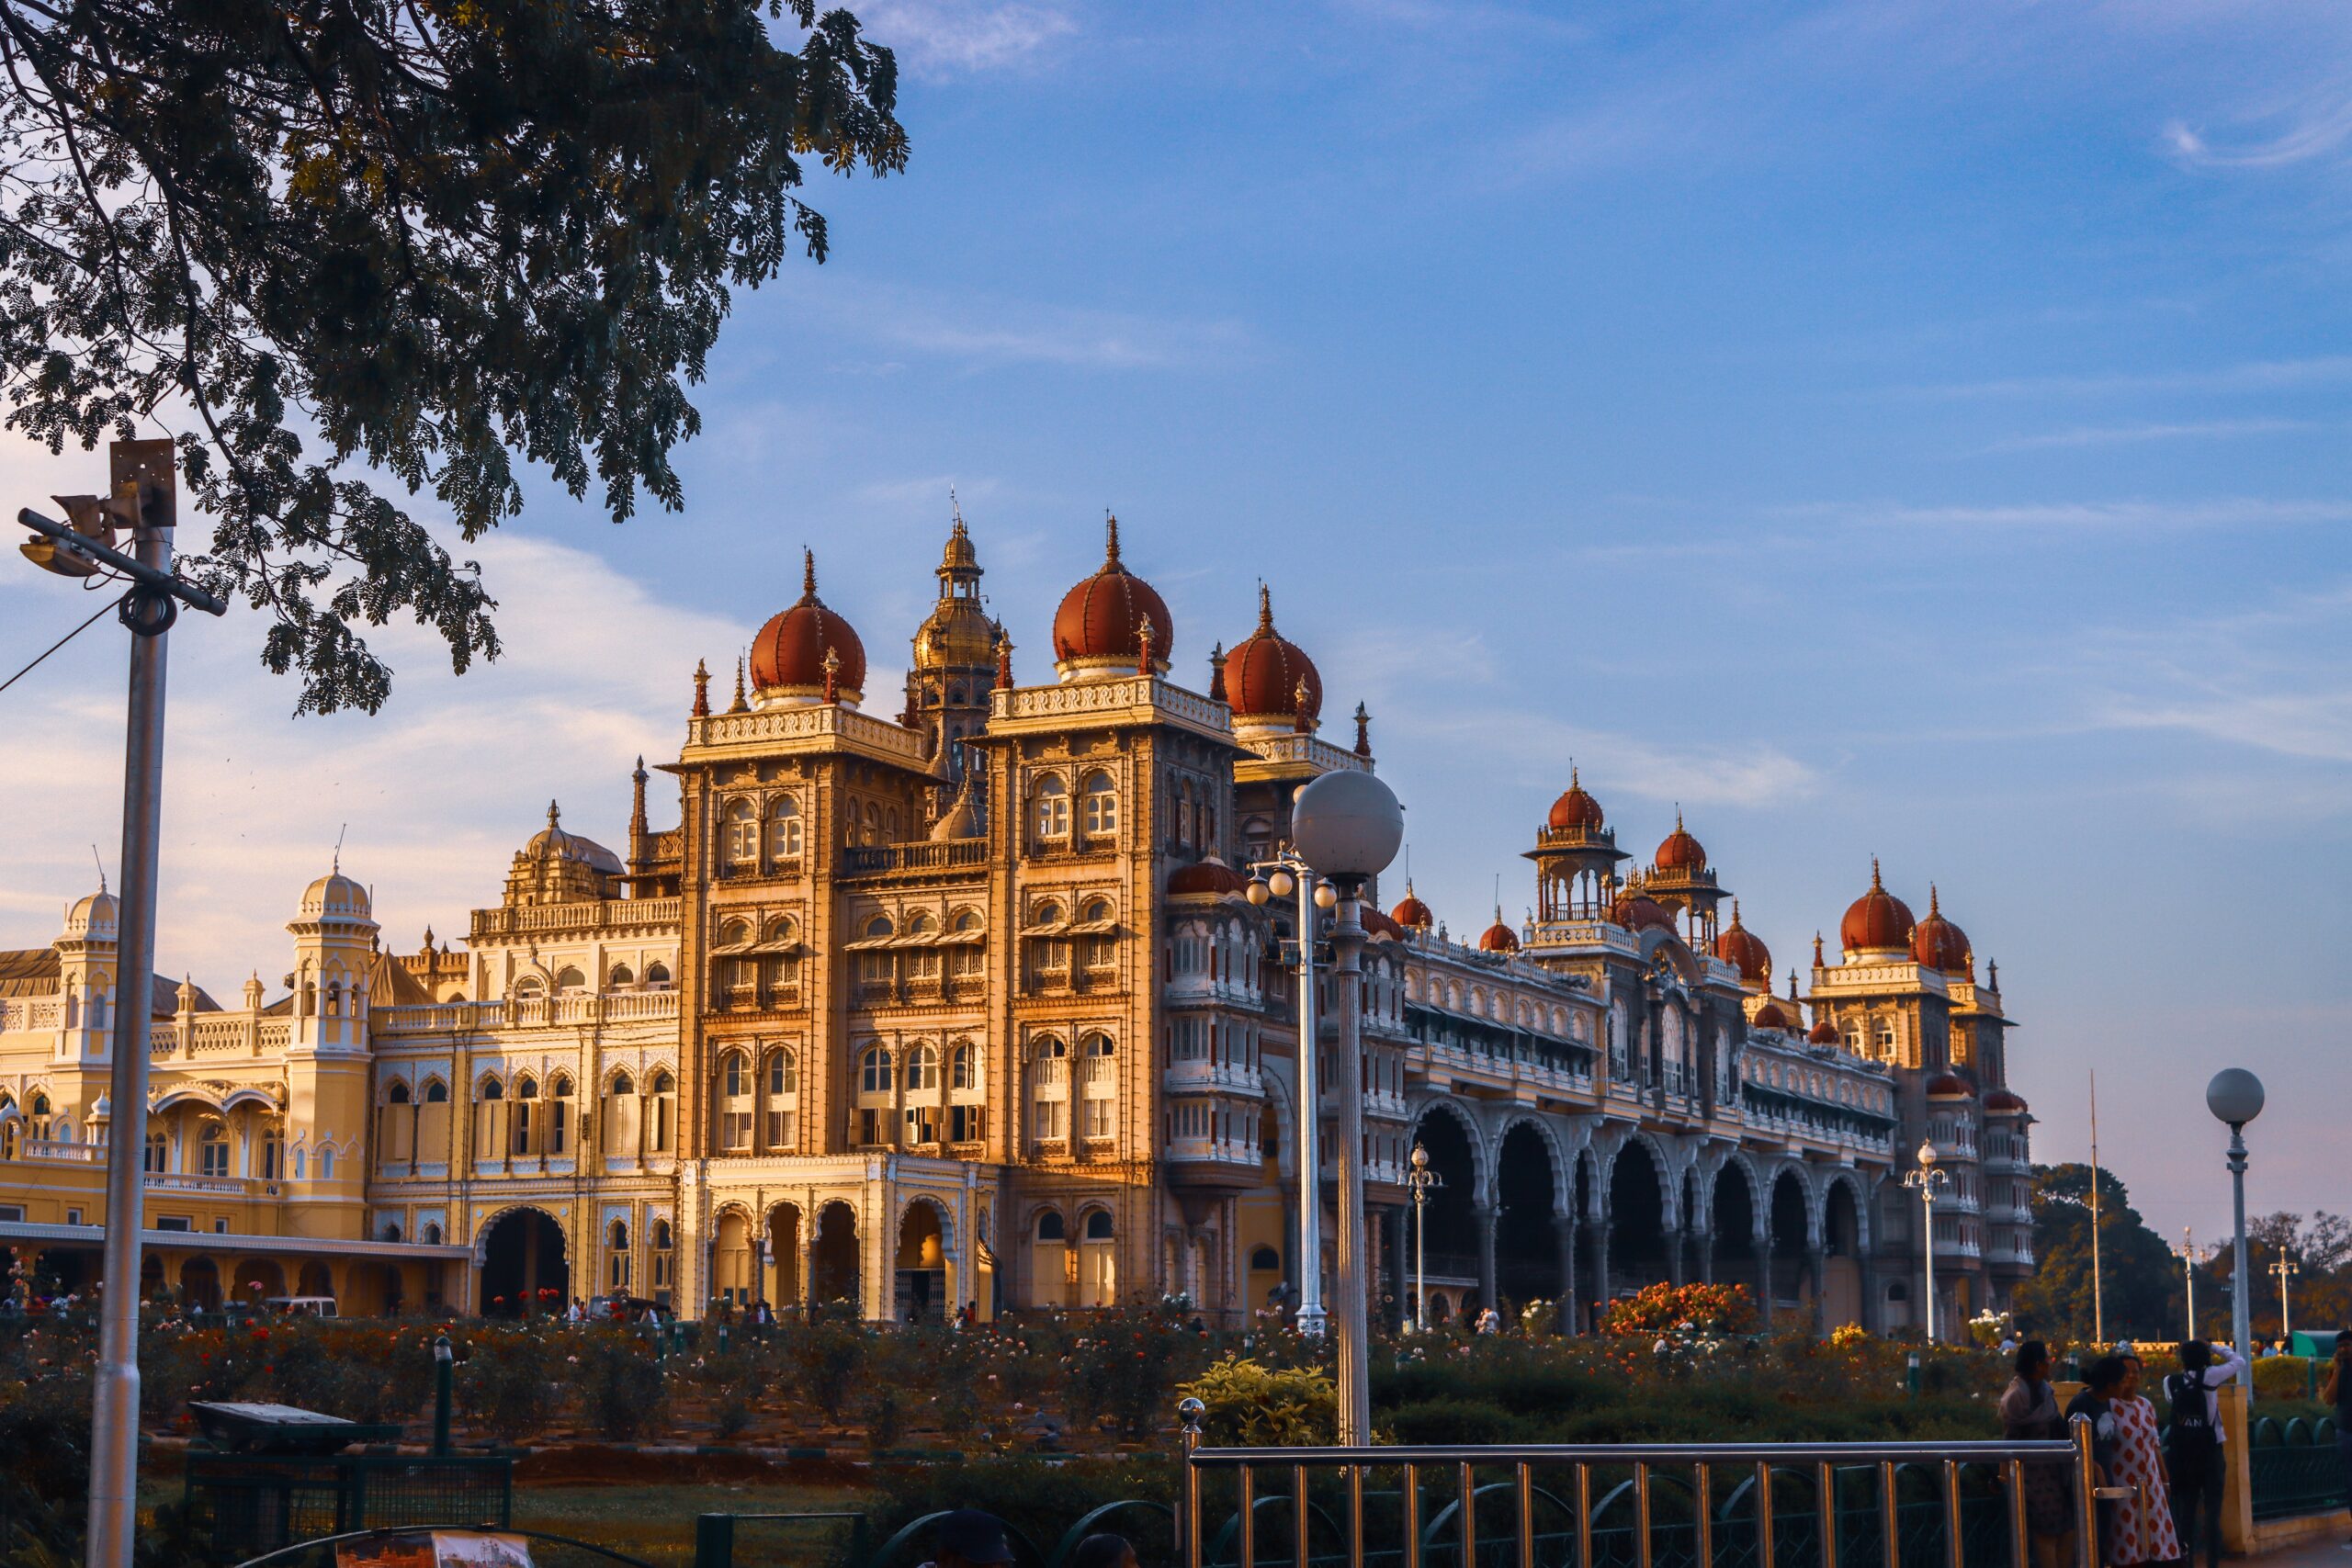 The Mysore Palace in South India